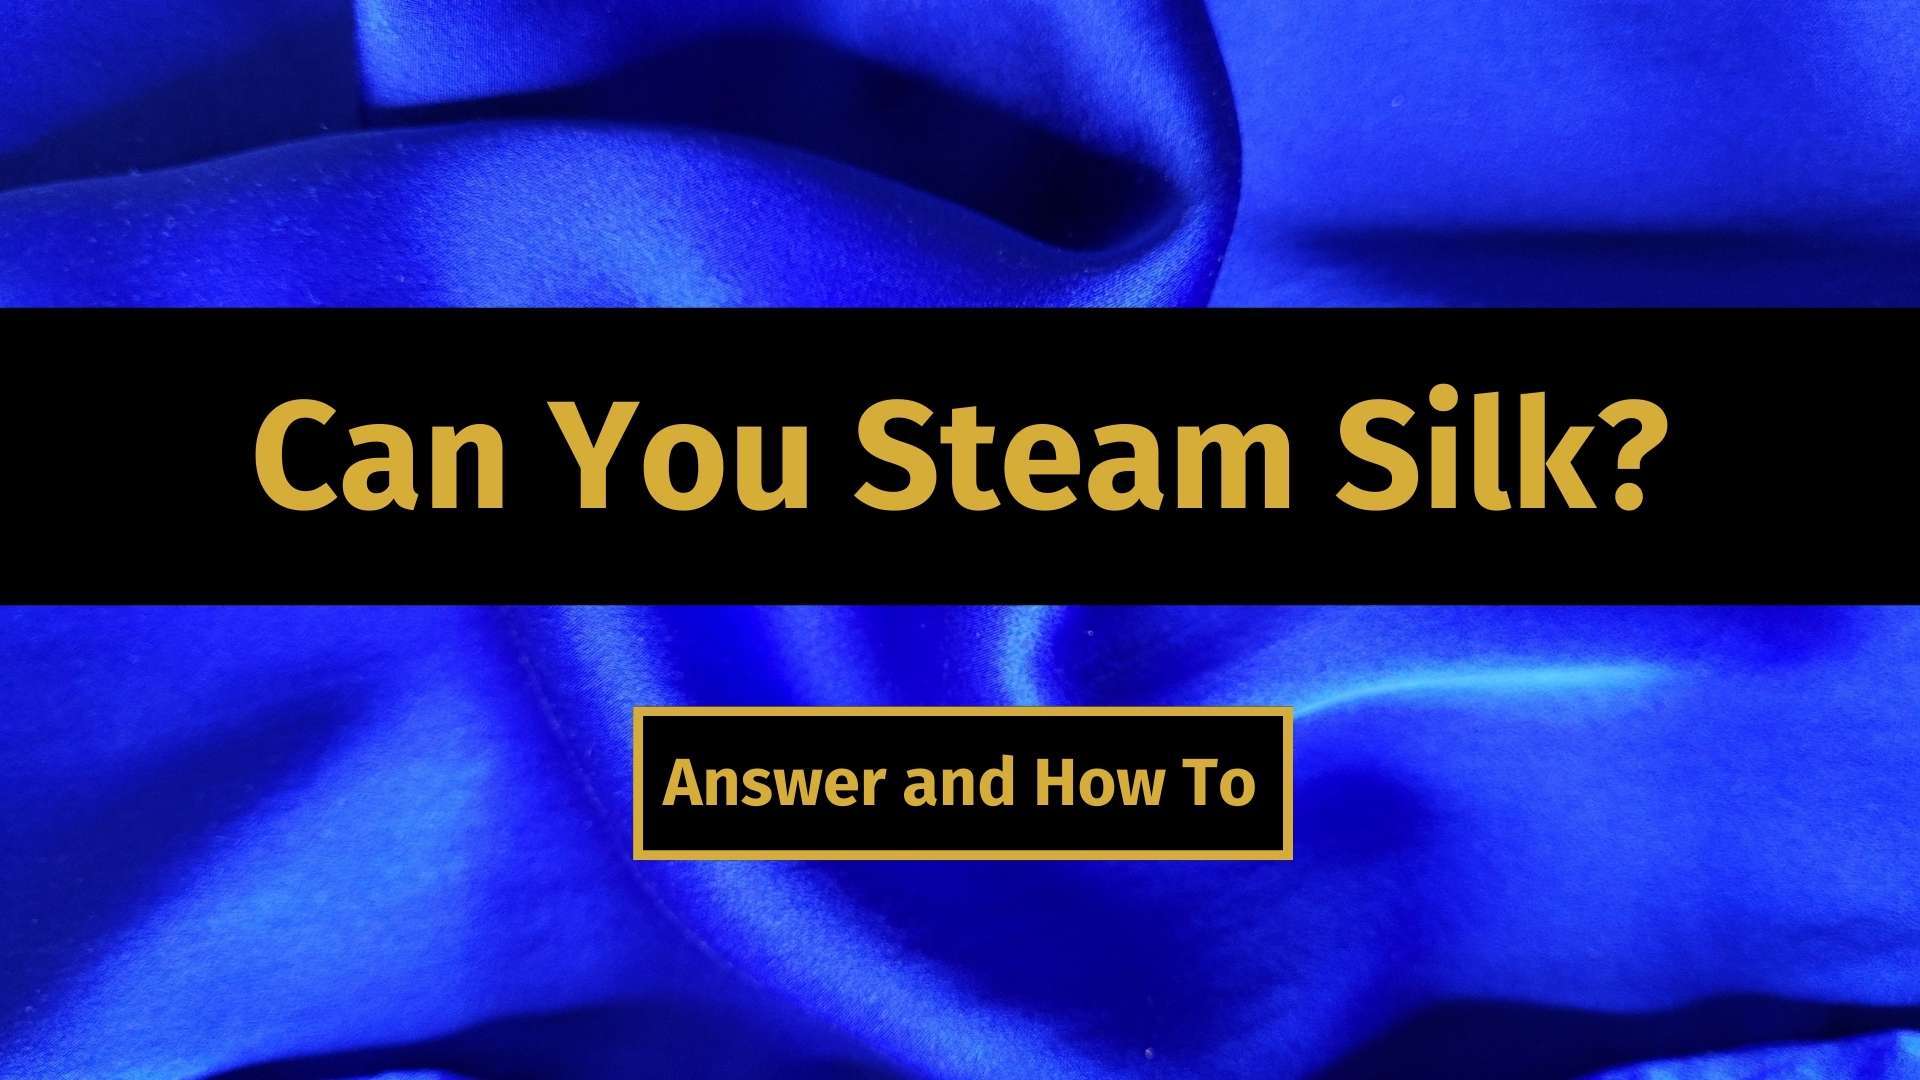 can you steam silk banner image